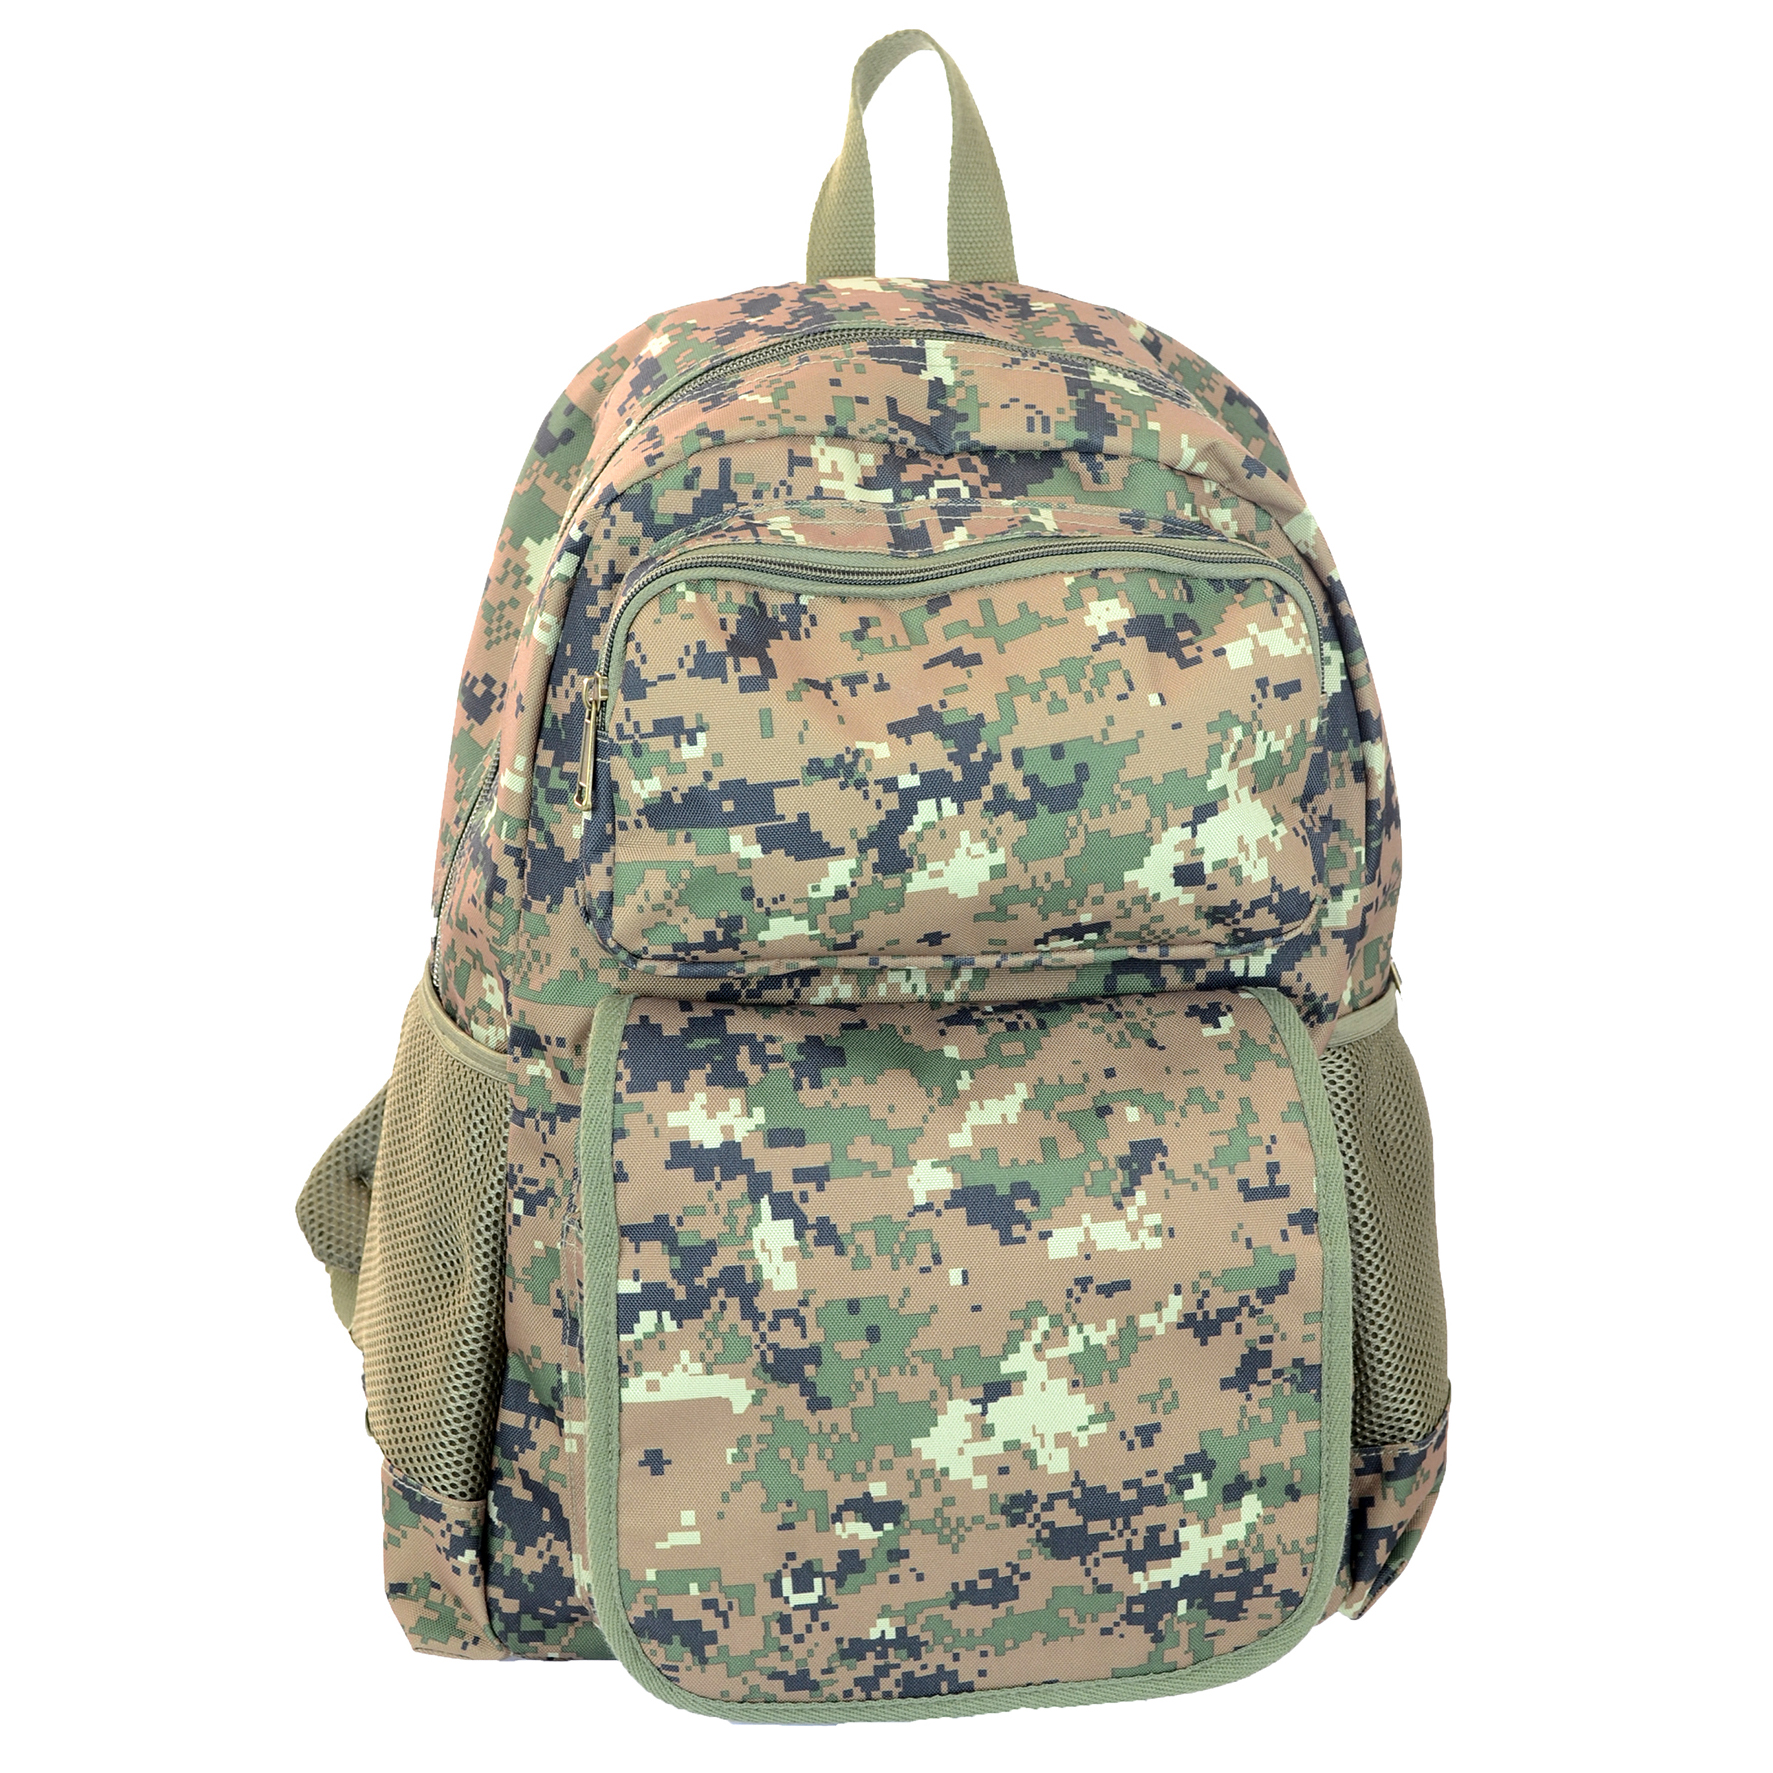 Montauk Leather Club Military Camouflage Woodland Print Water Resistant Backpack with 1Front Zipper Pocket and 1 Velcro Flap Zipper Pocket - image 1 of 4